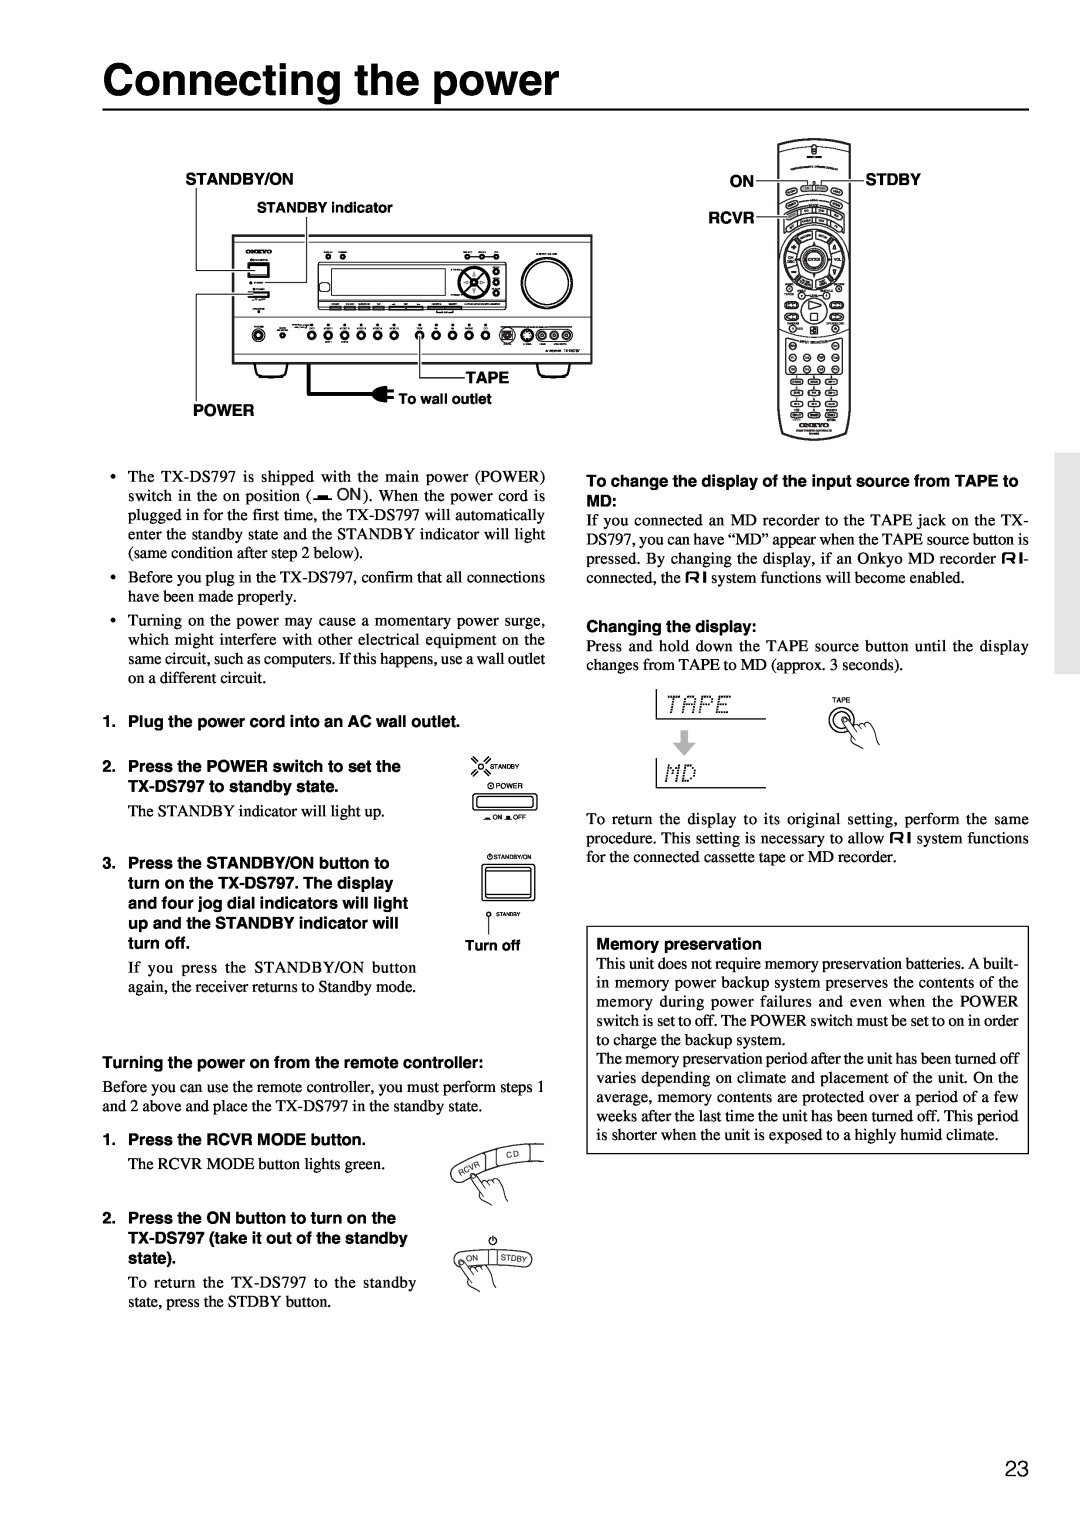 Onkyo TX-DS797 instruction manual Connecting the power 